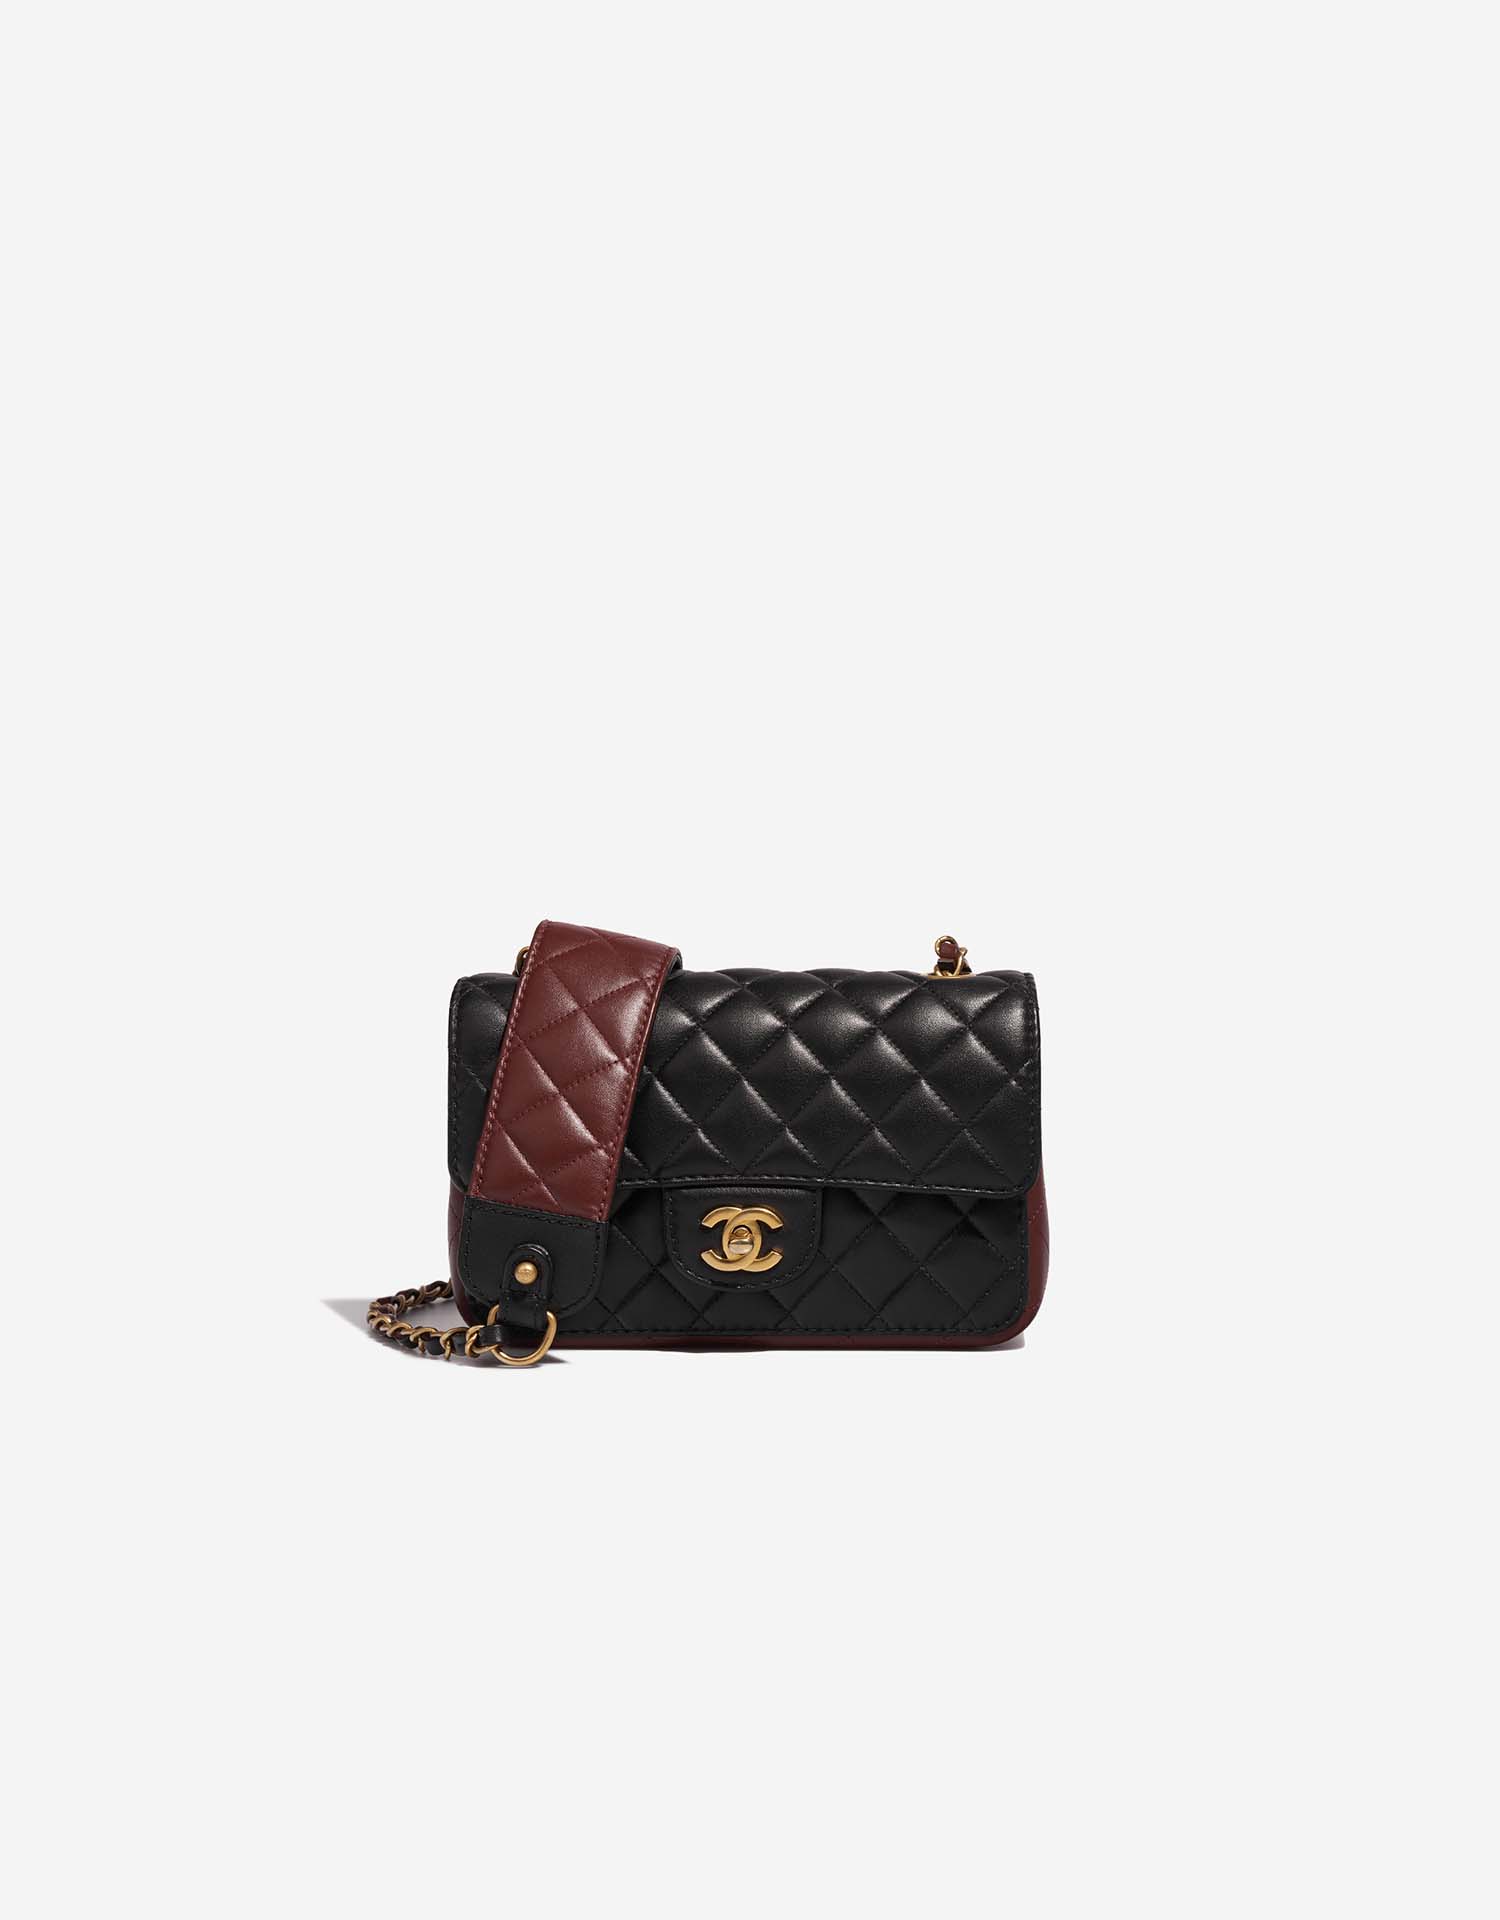 Chanel Classic shoulder Flap bag in beige quilted lambskin and gold hardware